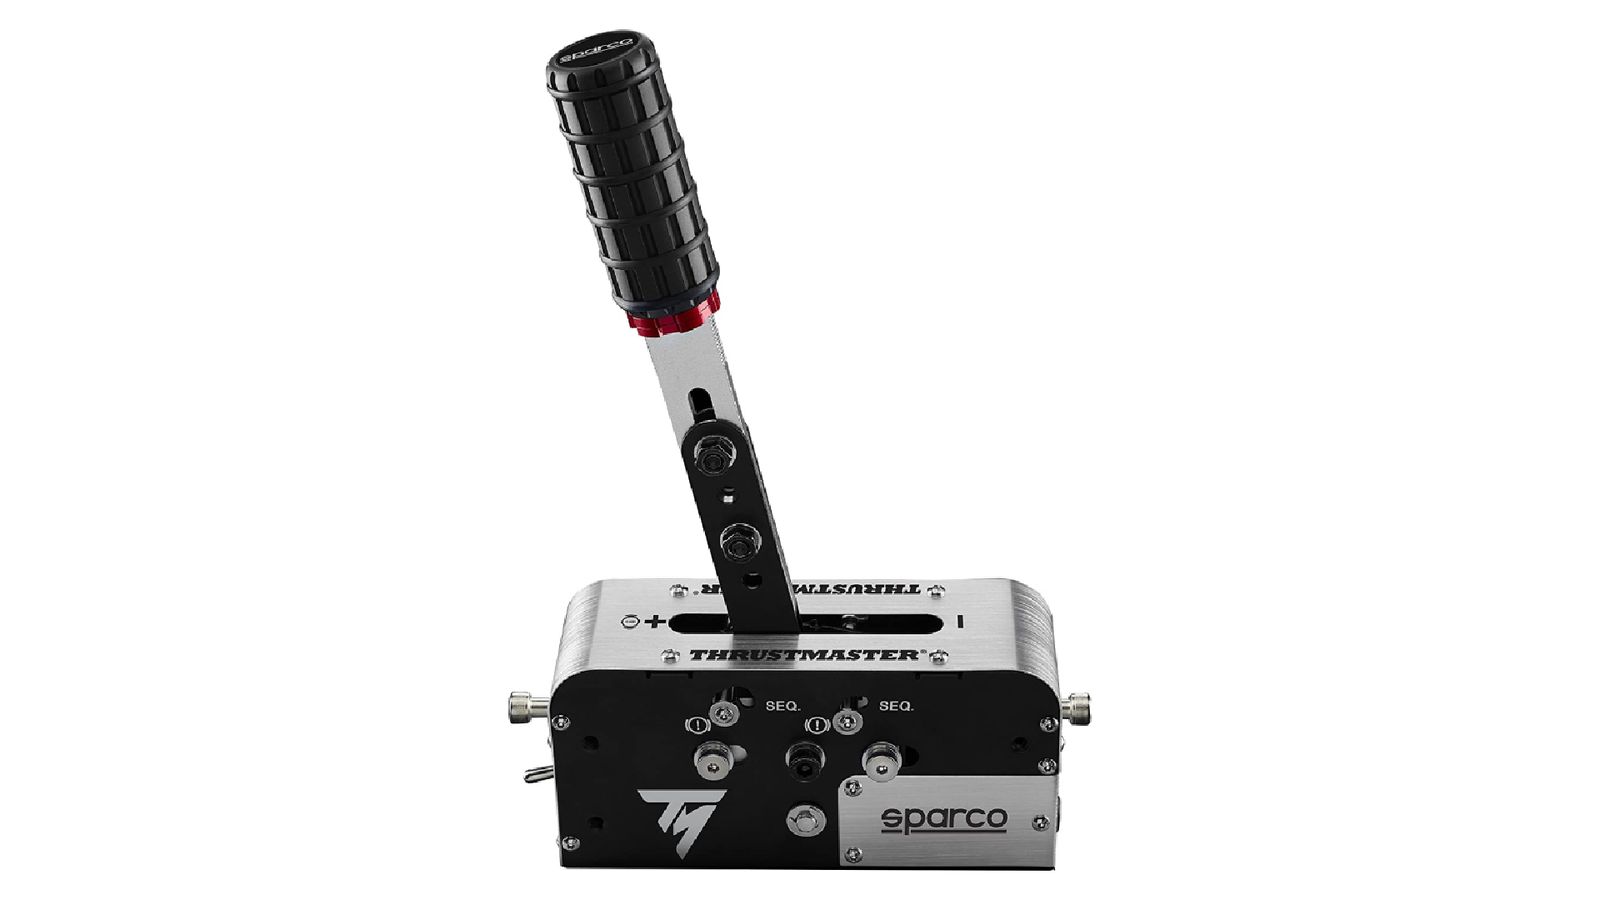 Thrustmaster TSS Handbrake Sparco Mod+ product image silver, black, and red sequential shifter.